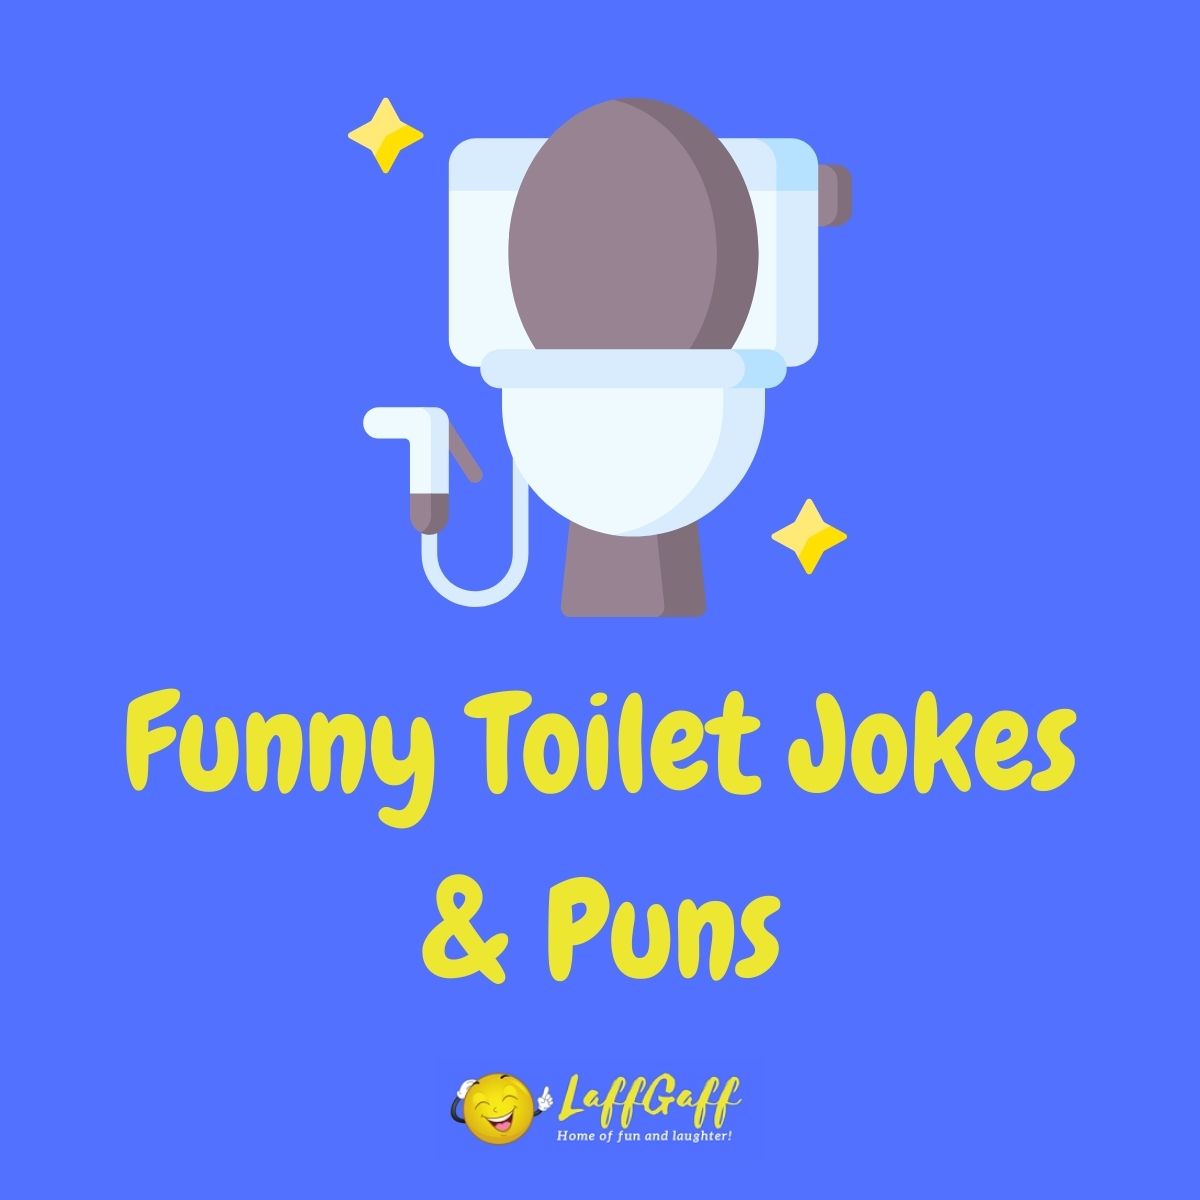 Featured image for a page of funny toilet jokes and puns.